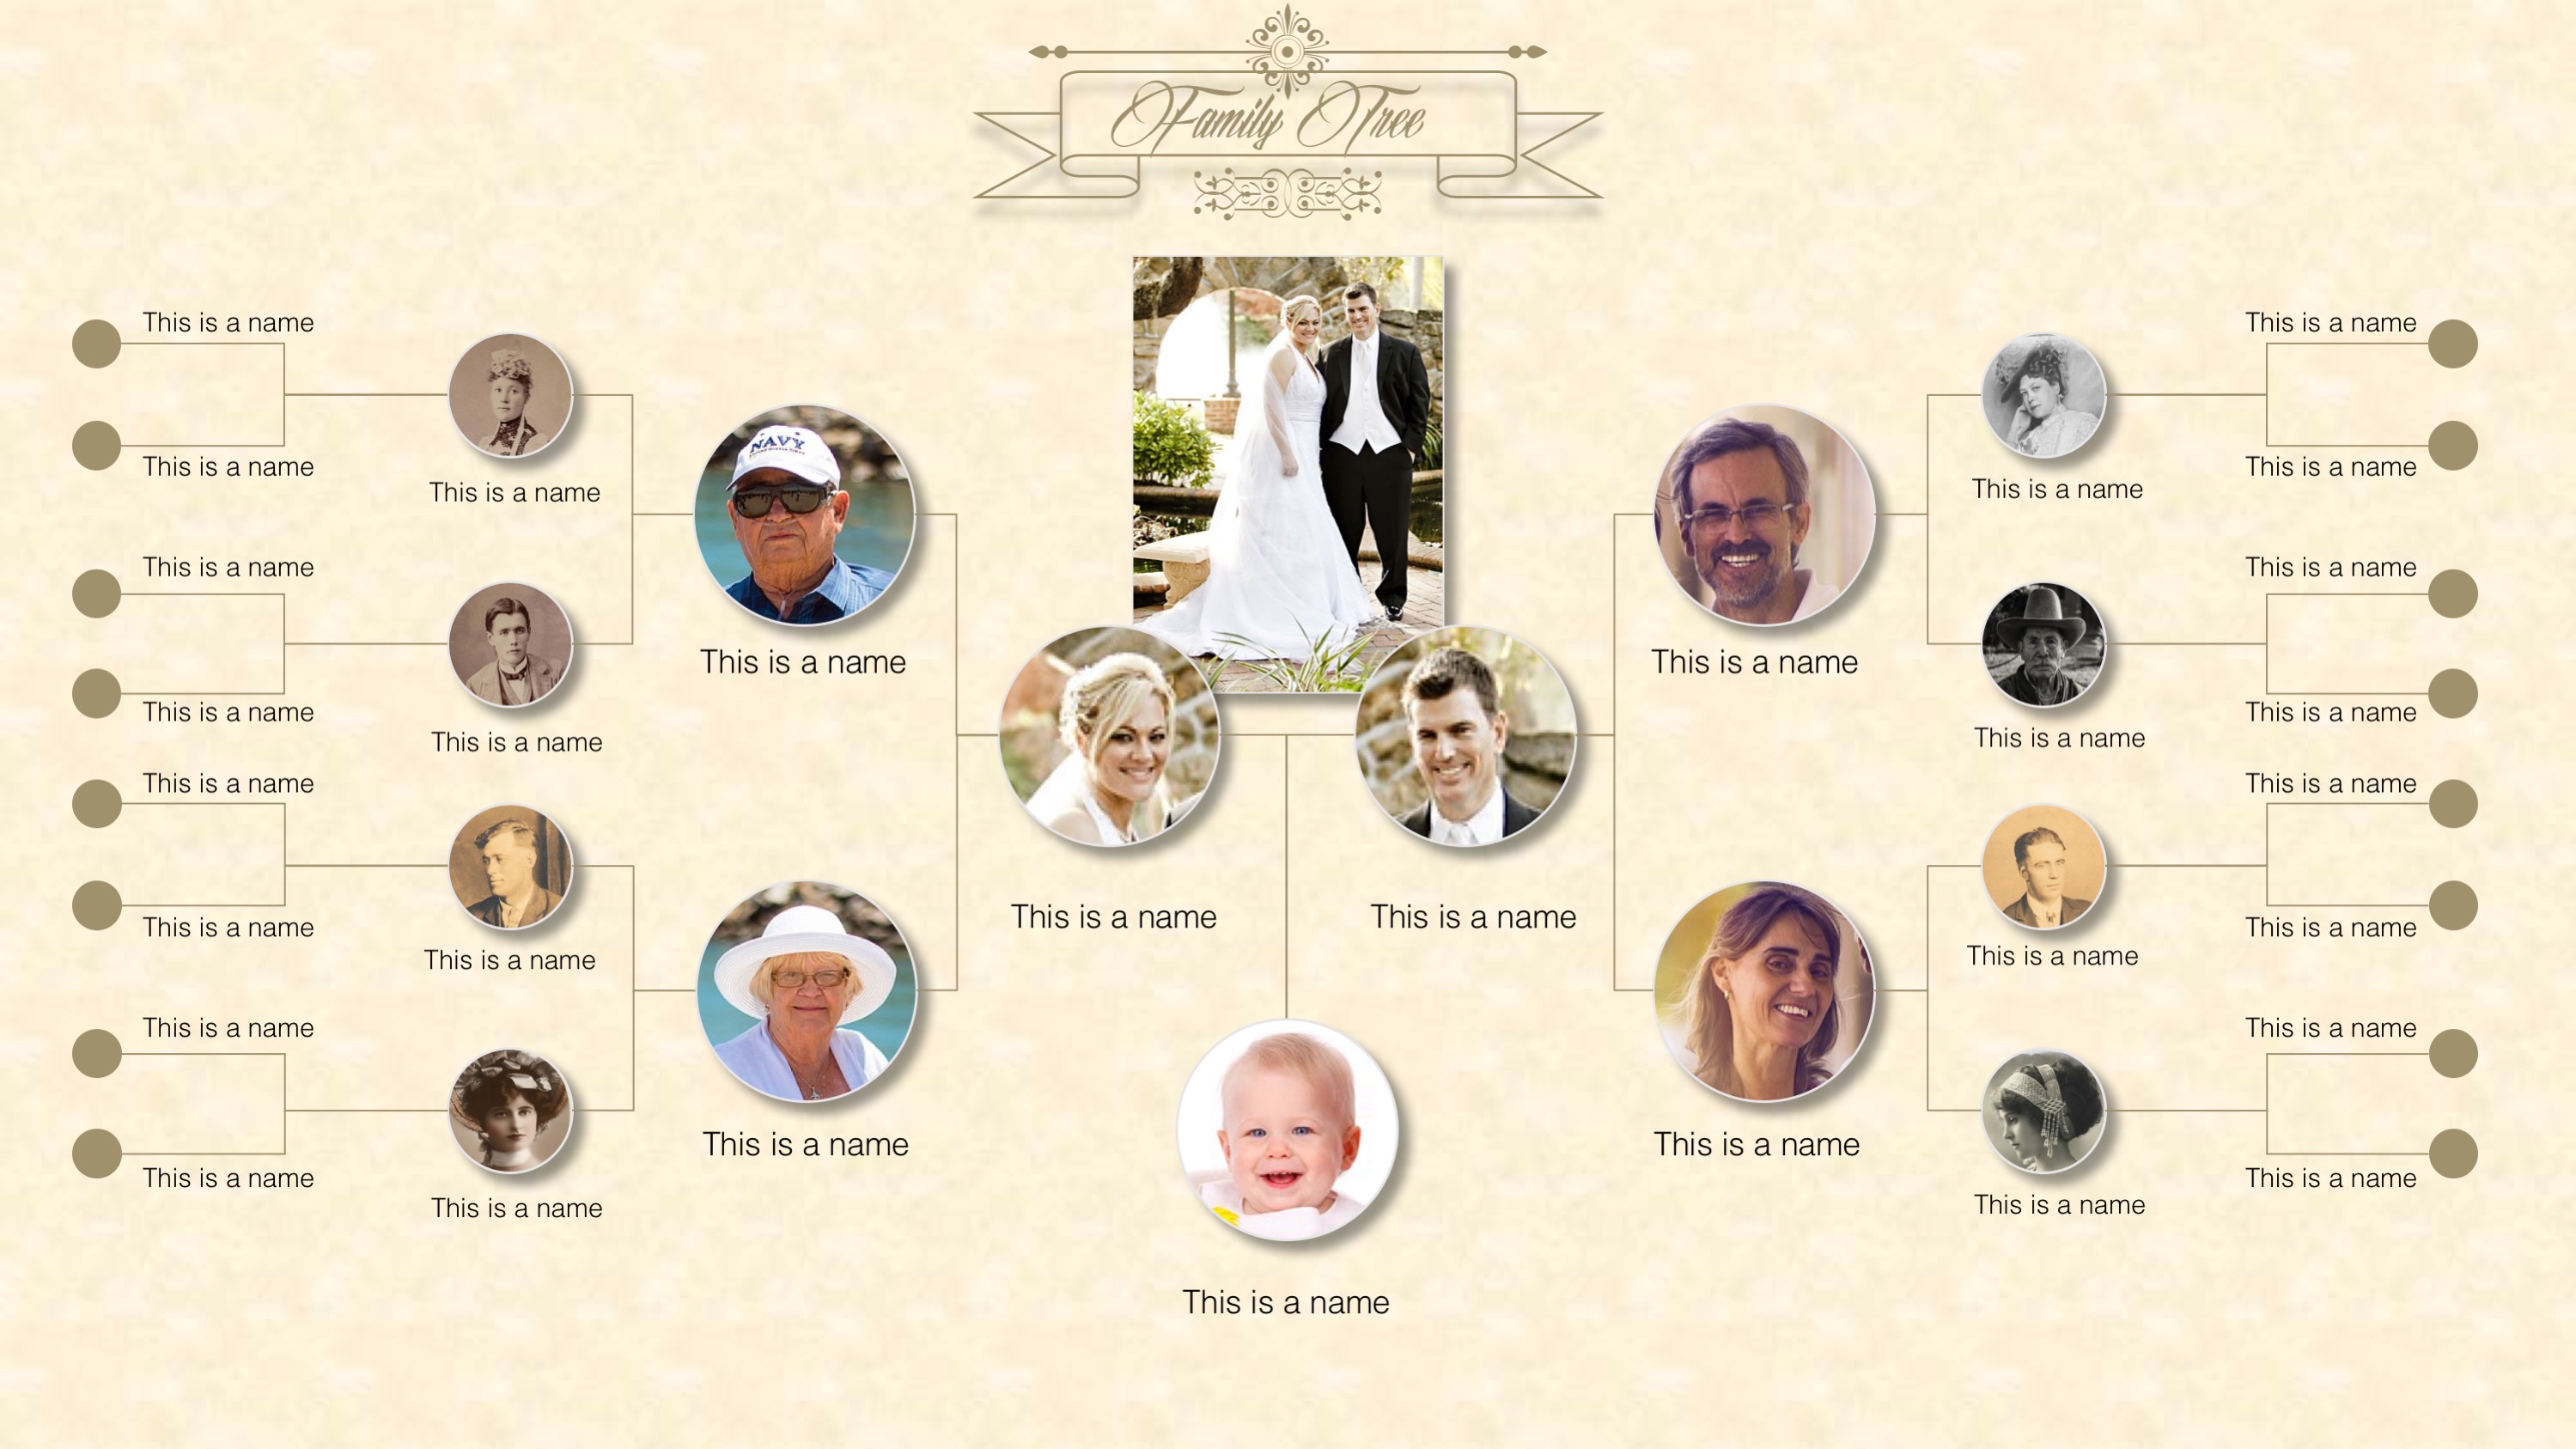 Family Tree Powerpoint Template Free Download